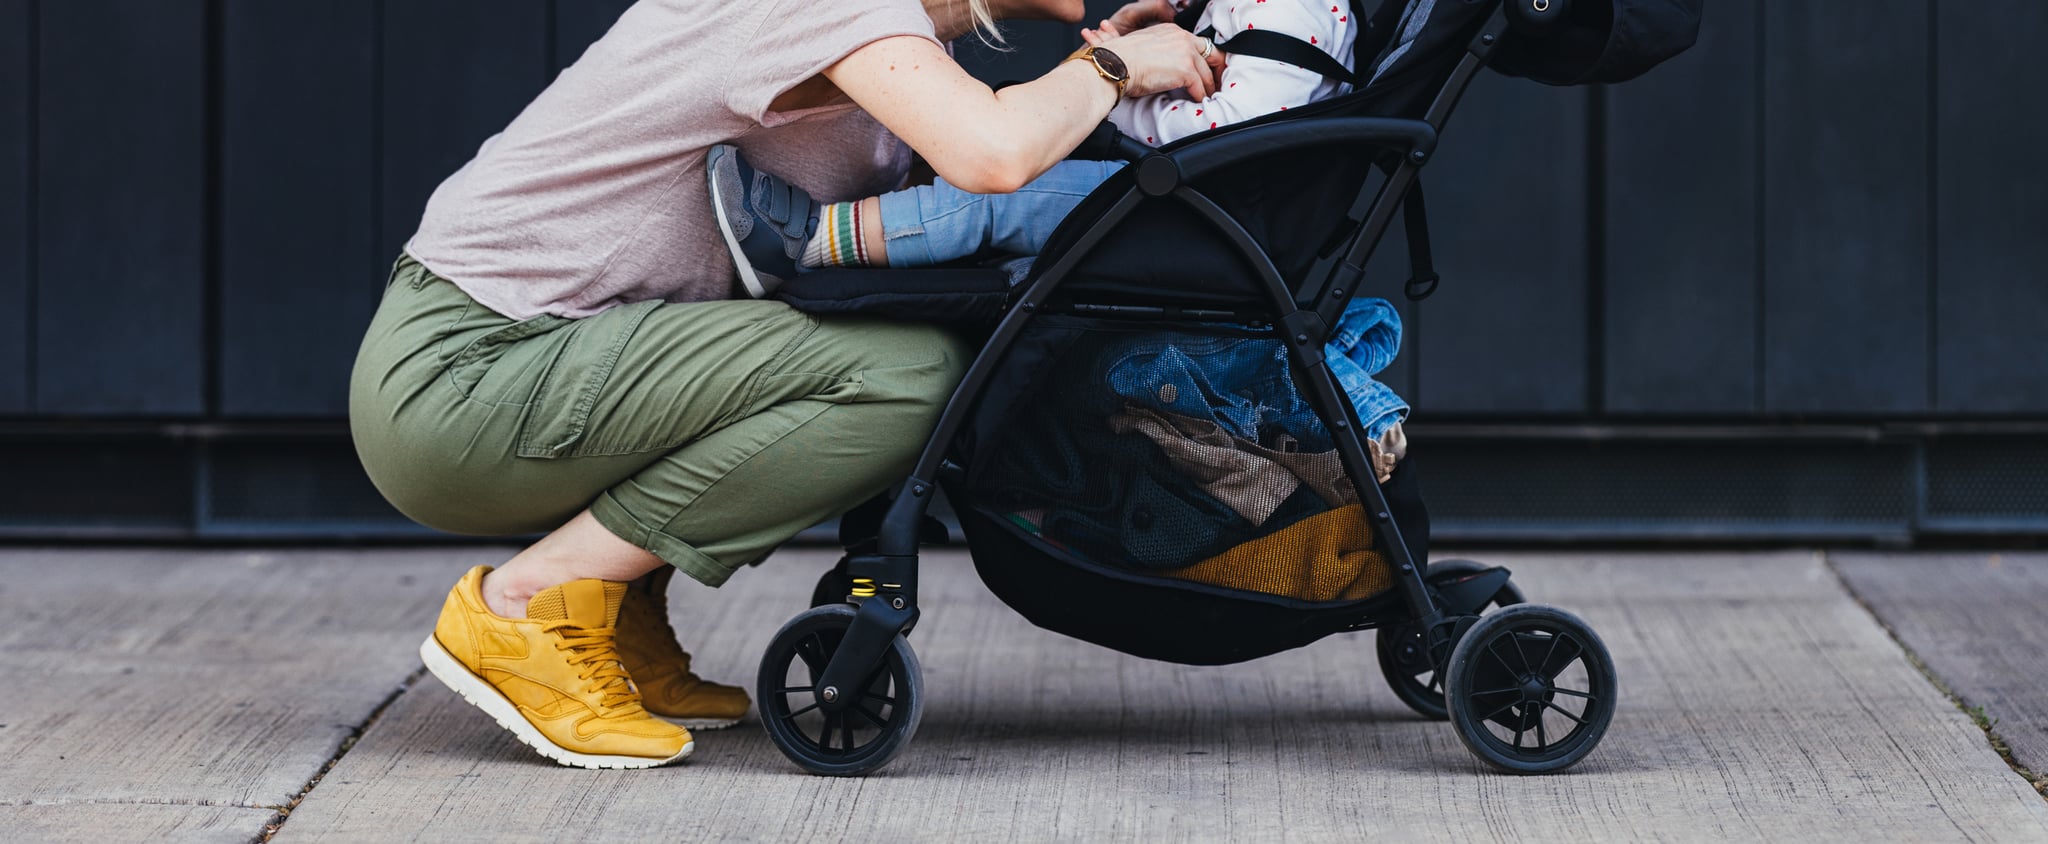 10 Best Sneakers For Moms on the Go